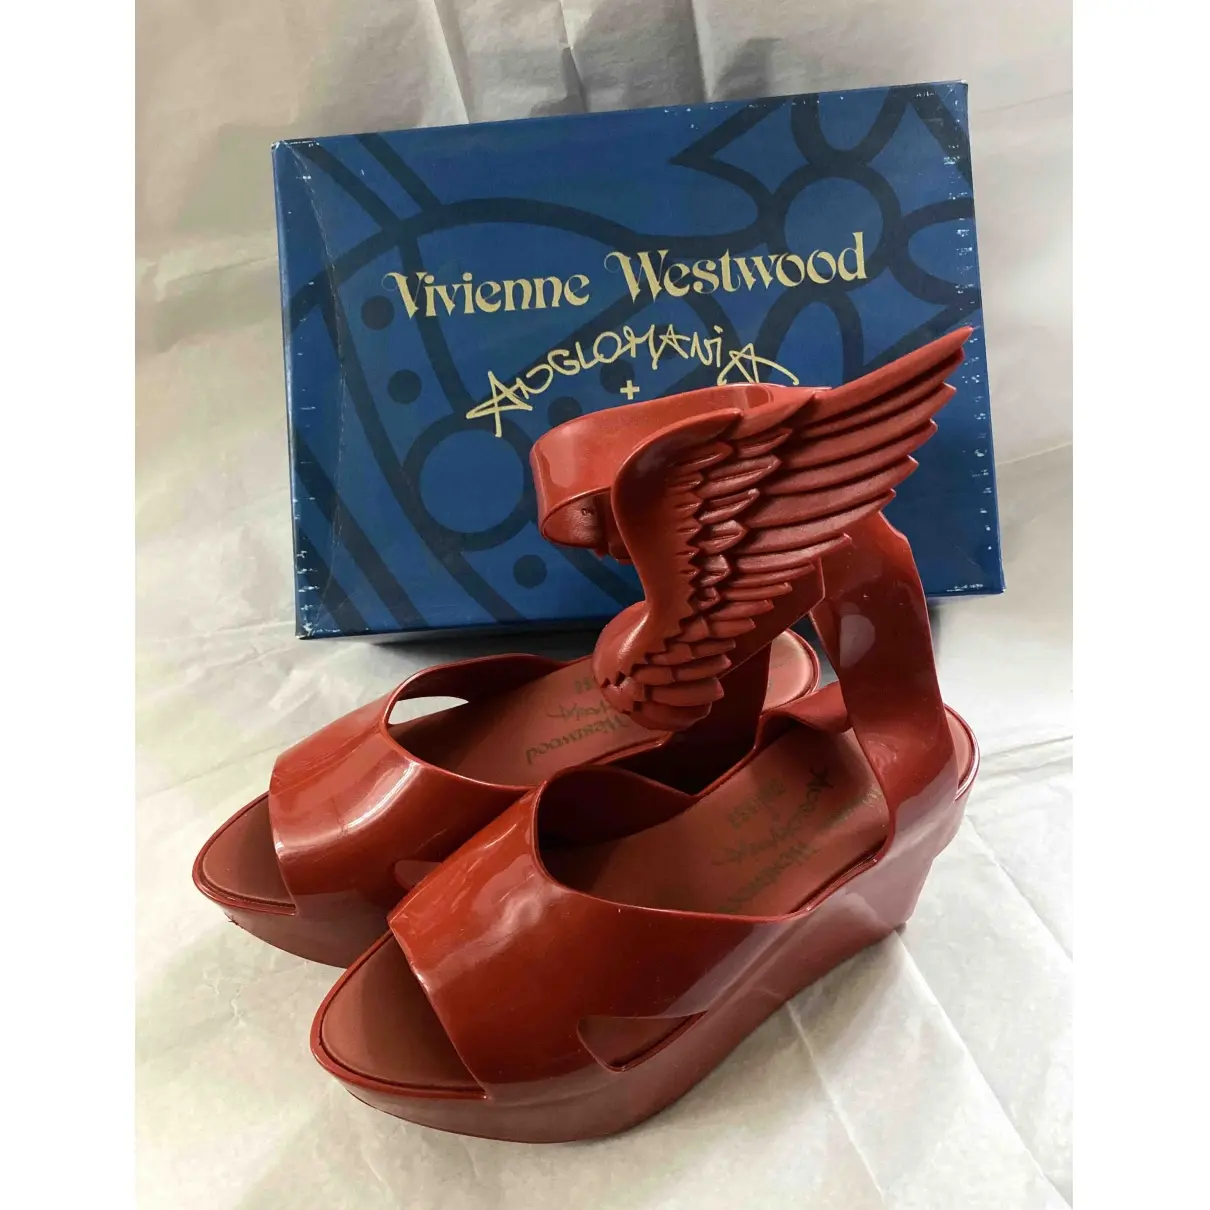 Vivienne Westwood Anglomania Sandal for sale